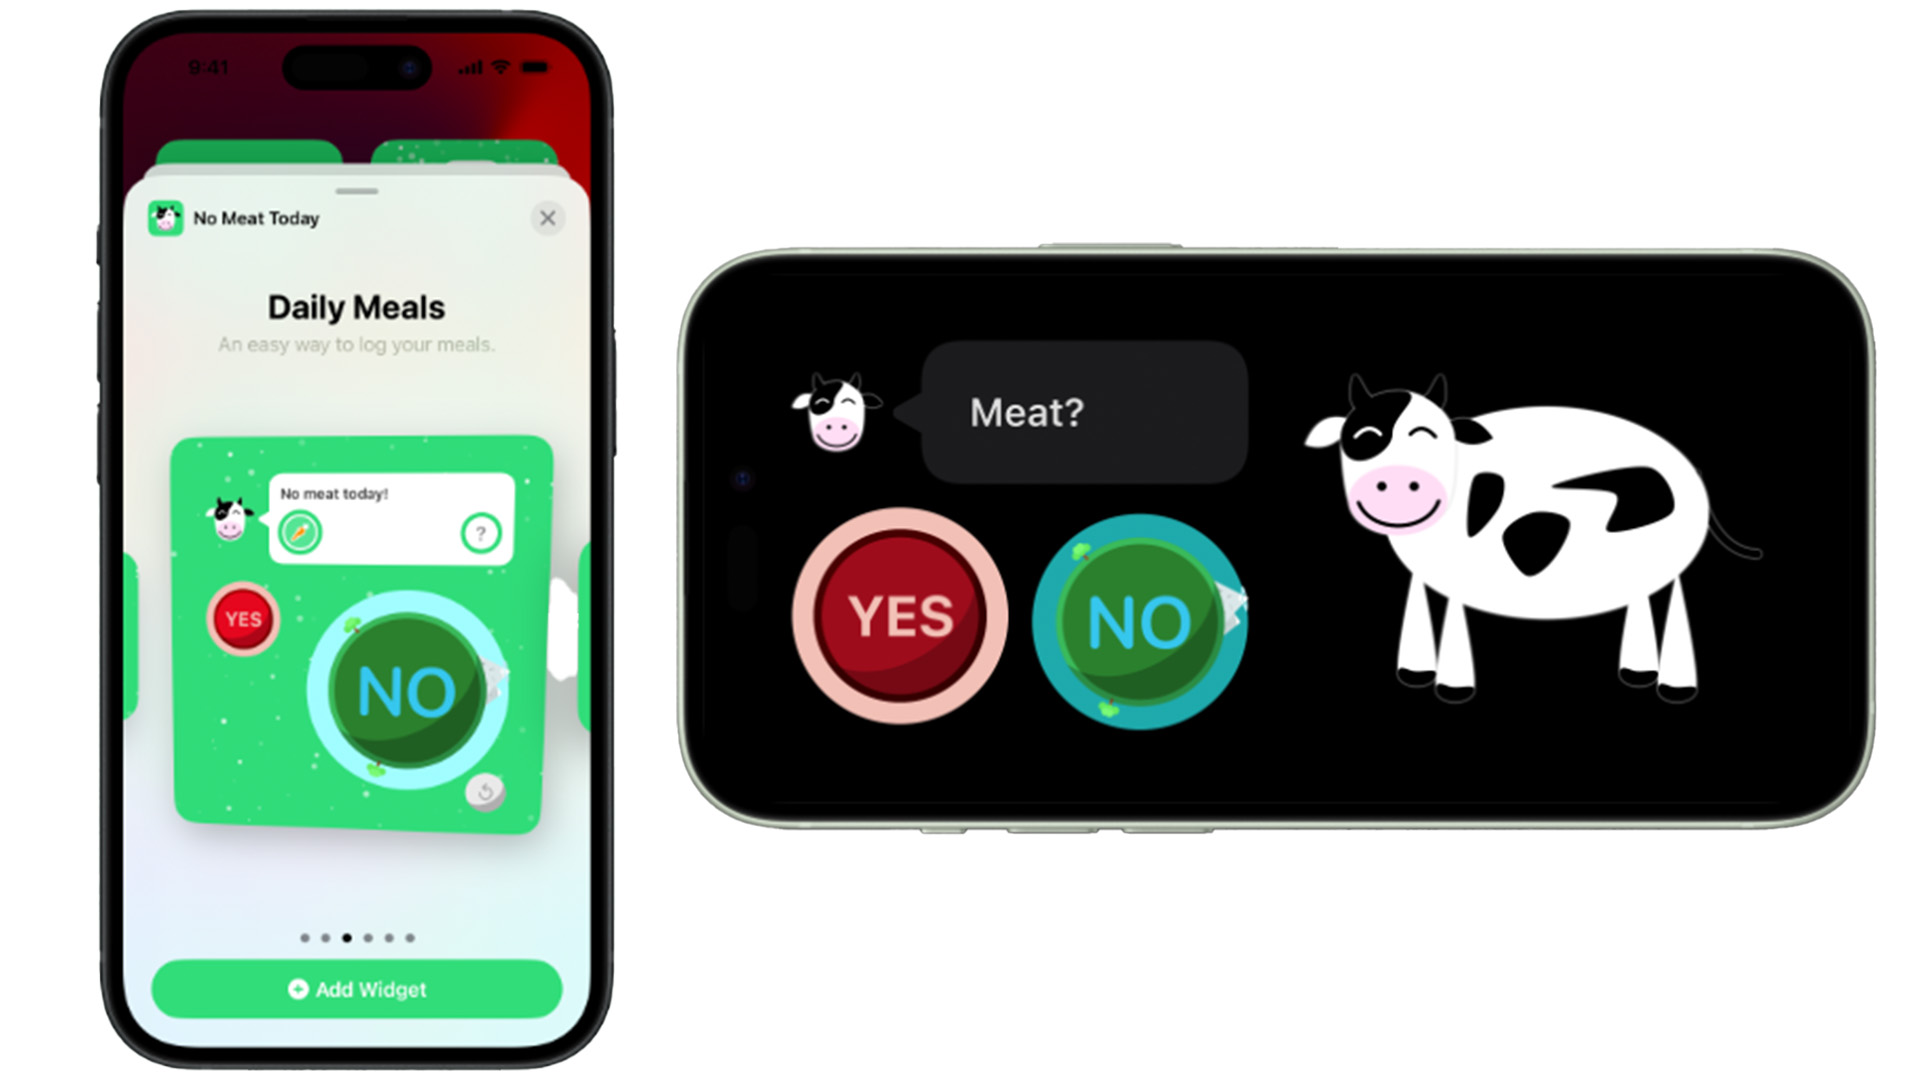 No Meat Today in iOS 17